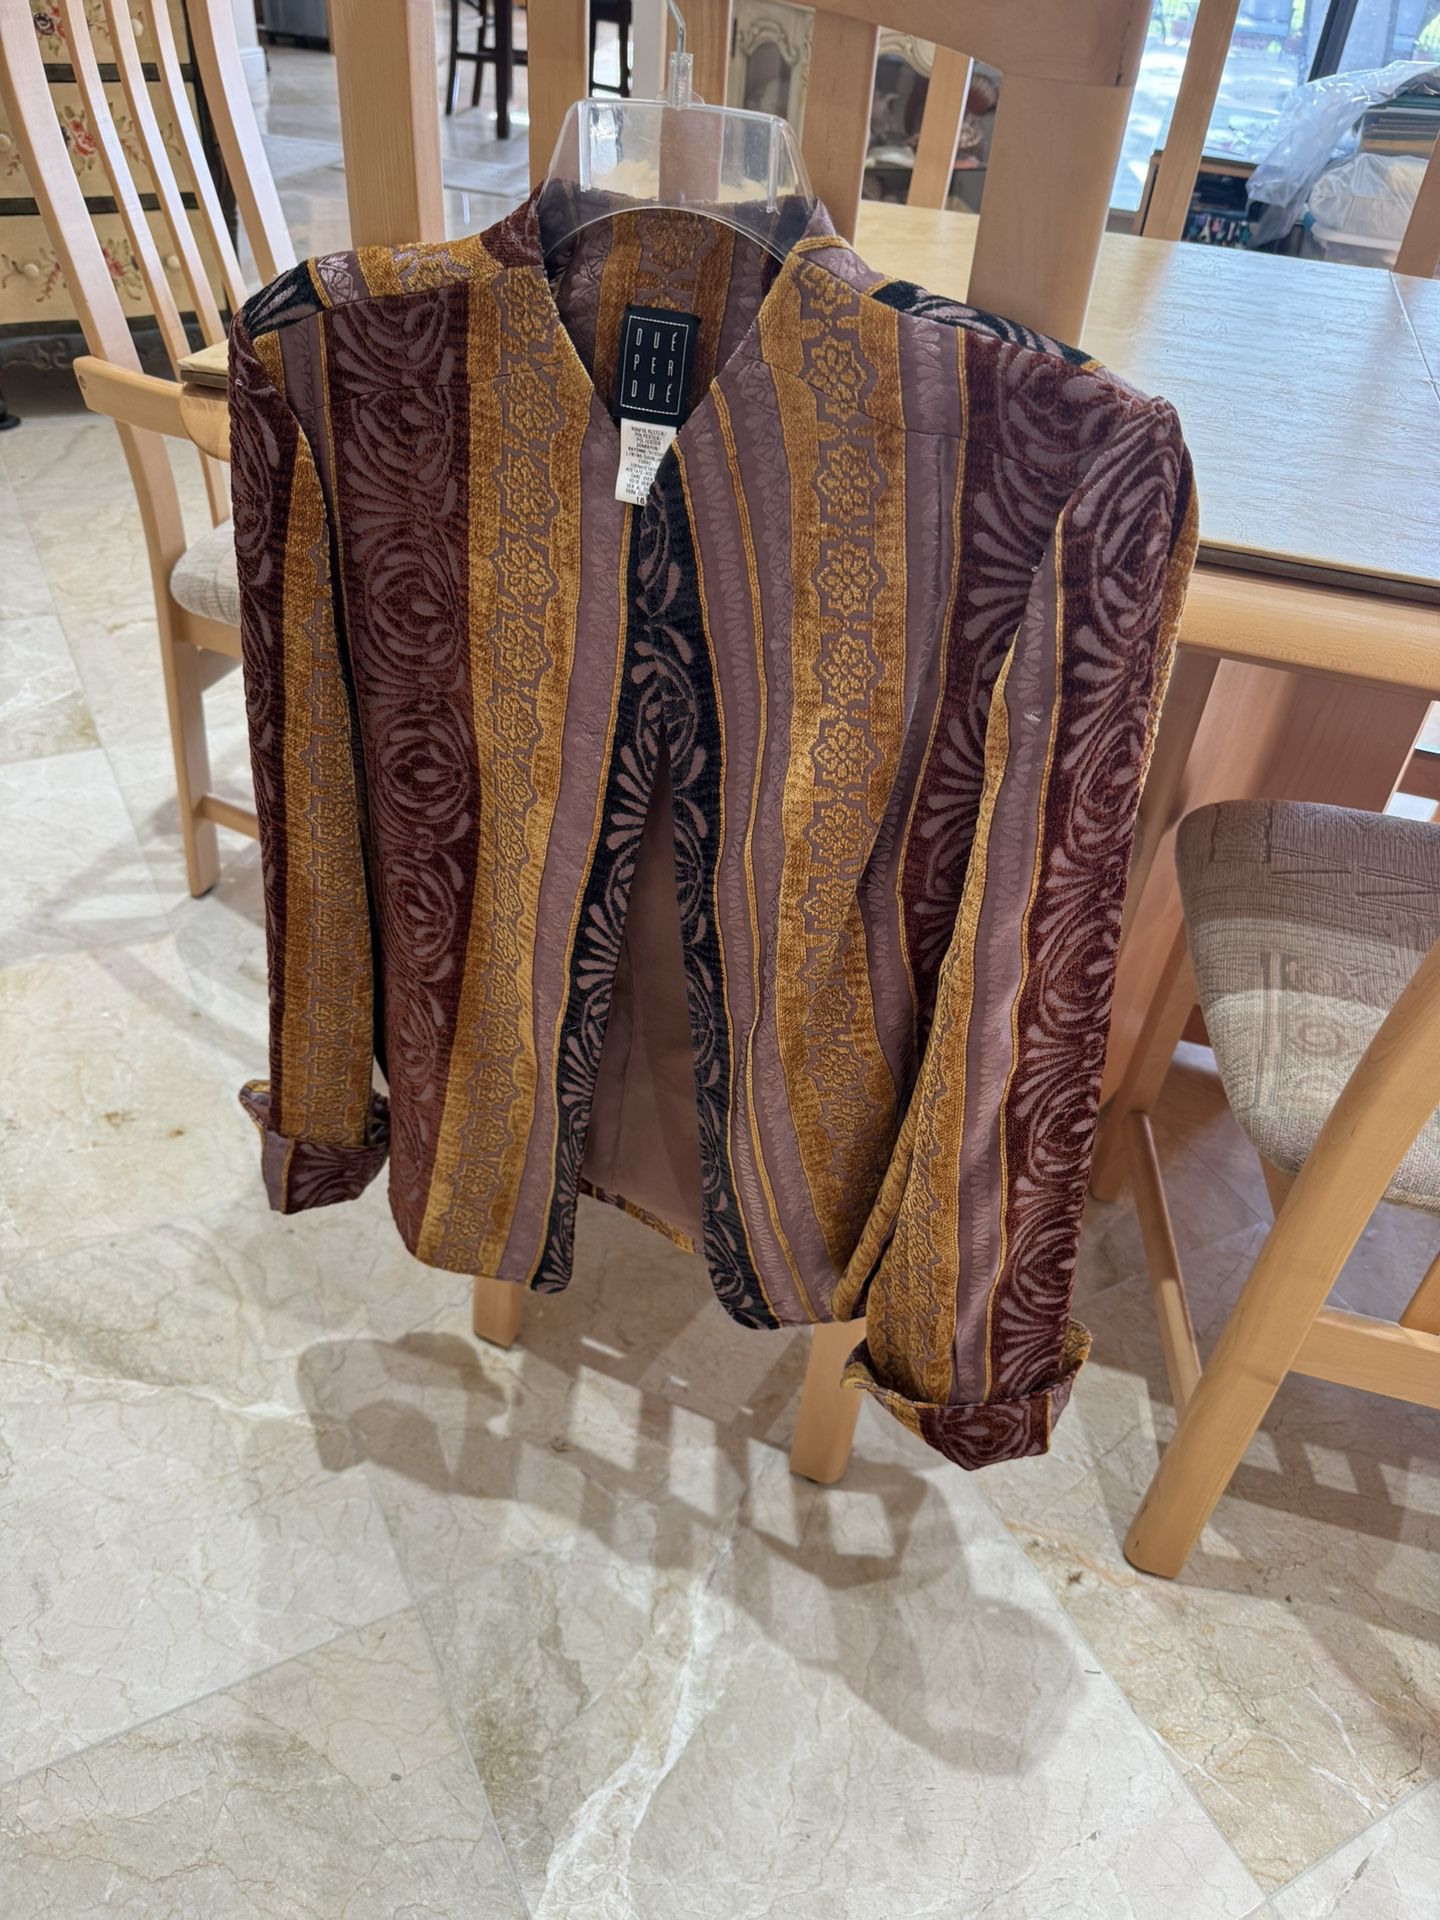 Price Drop For Luxurious Size 16 Fully-lined Jewel-tone Jacket With Two Side Pockets And Two Interior Pockets Large Enough For A Phone!